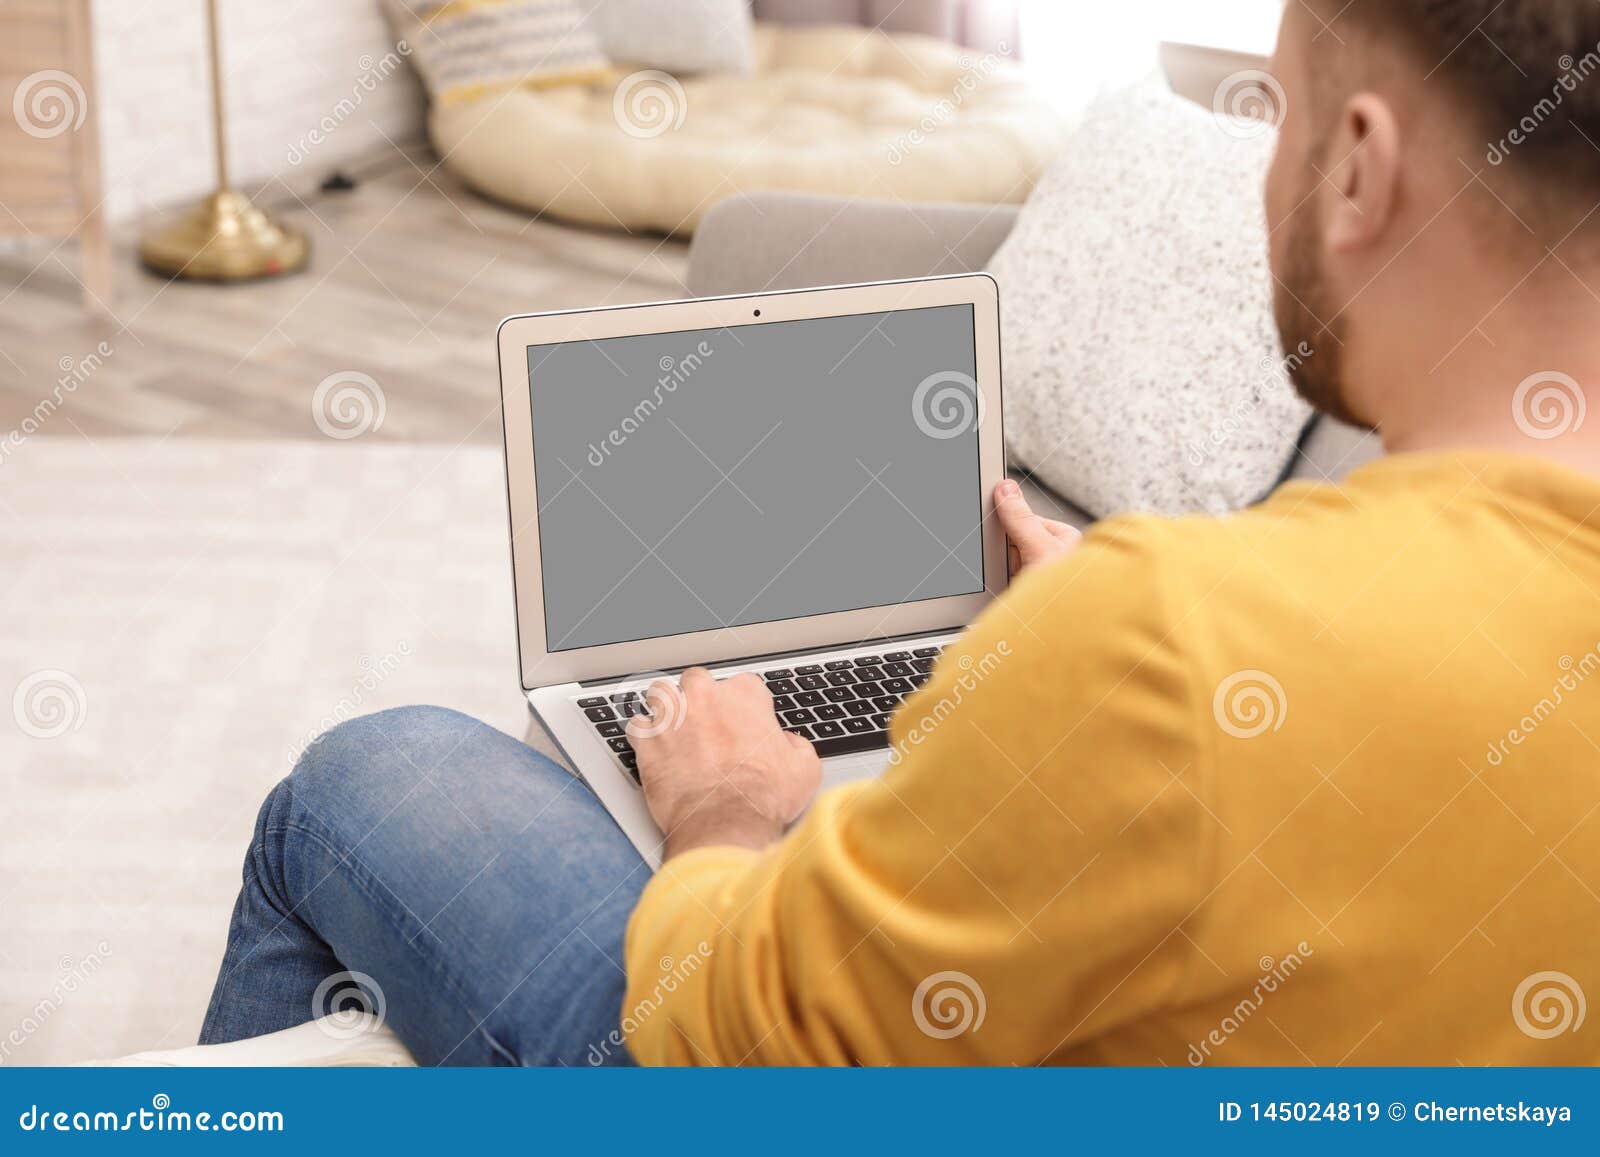 Young Man Using Video Chat On Laptop In Living Room. Space For Design ...